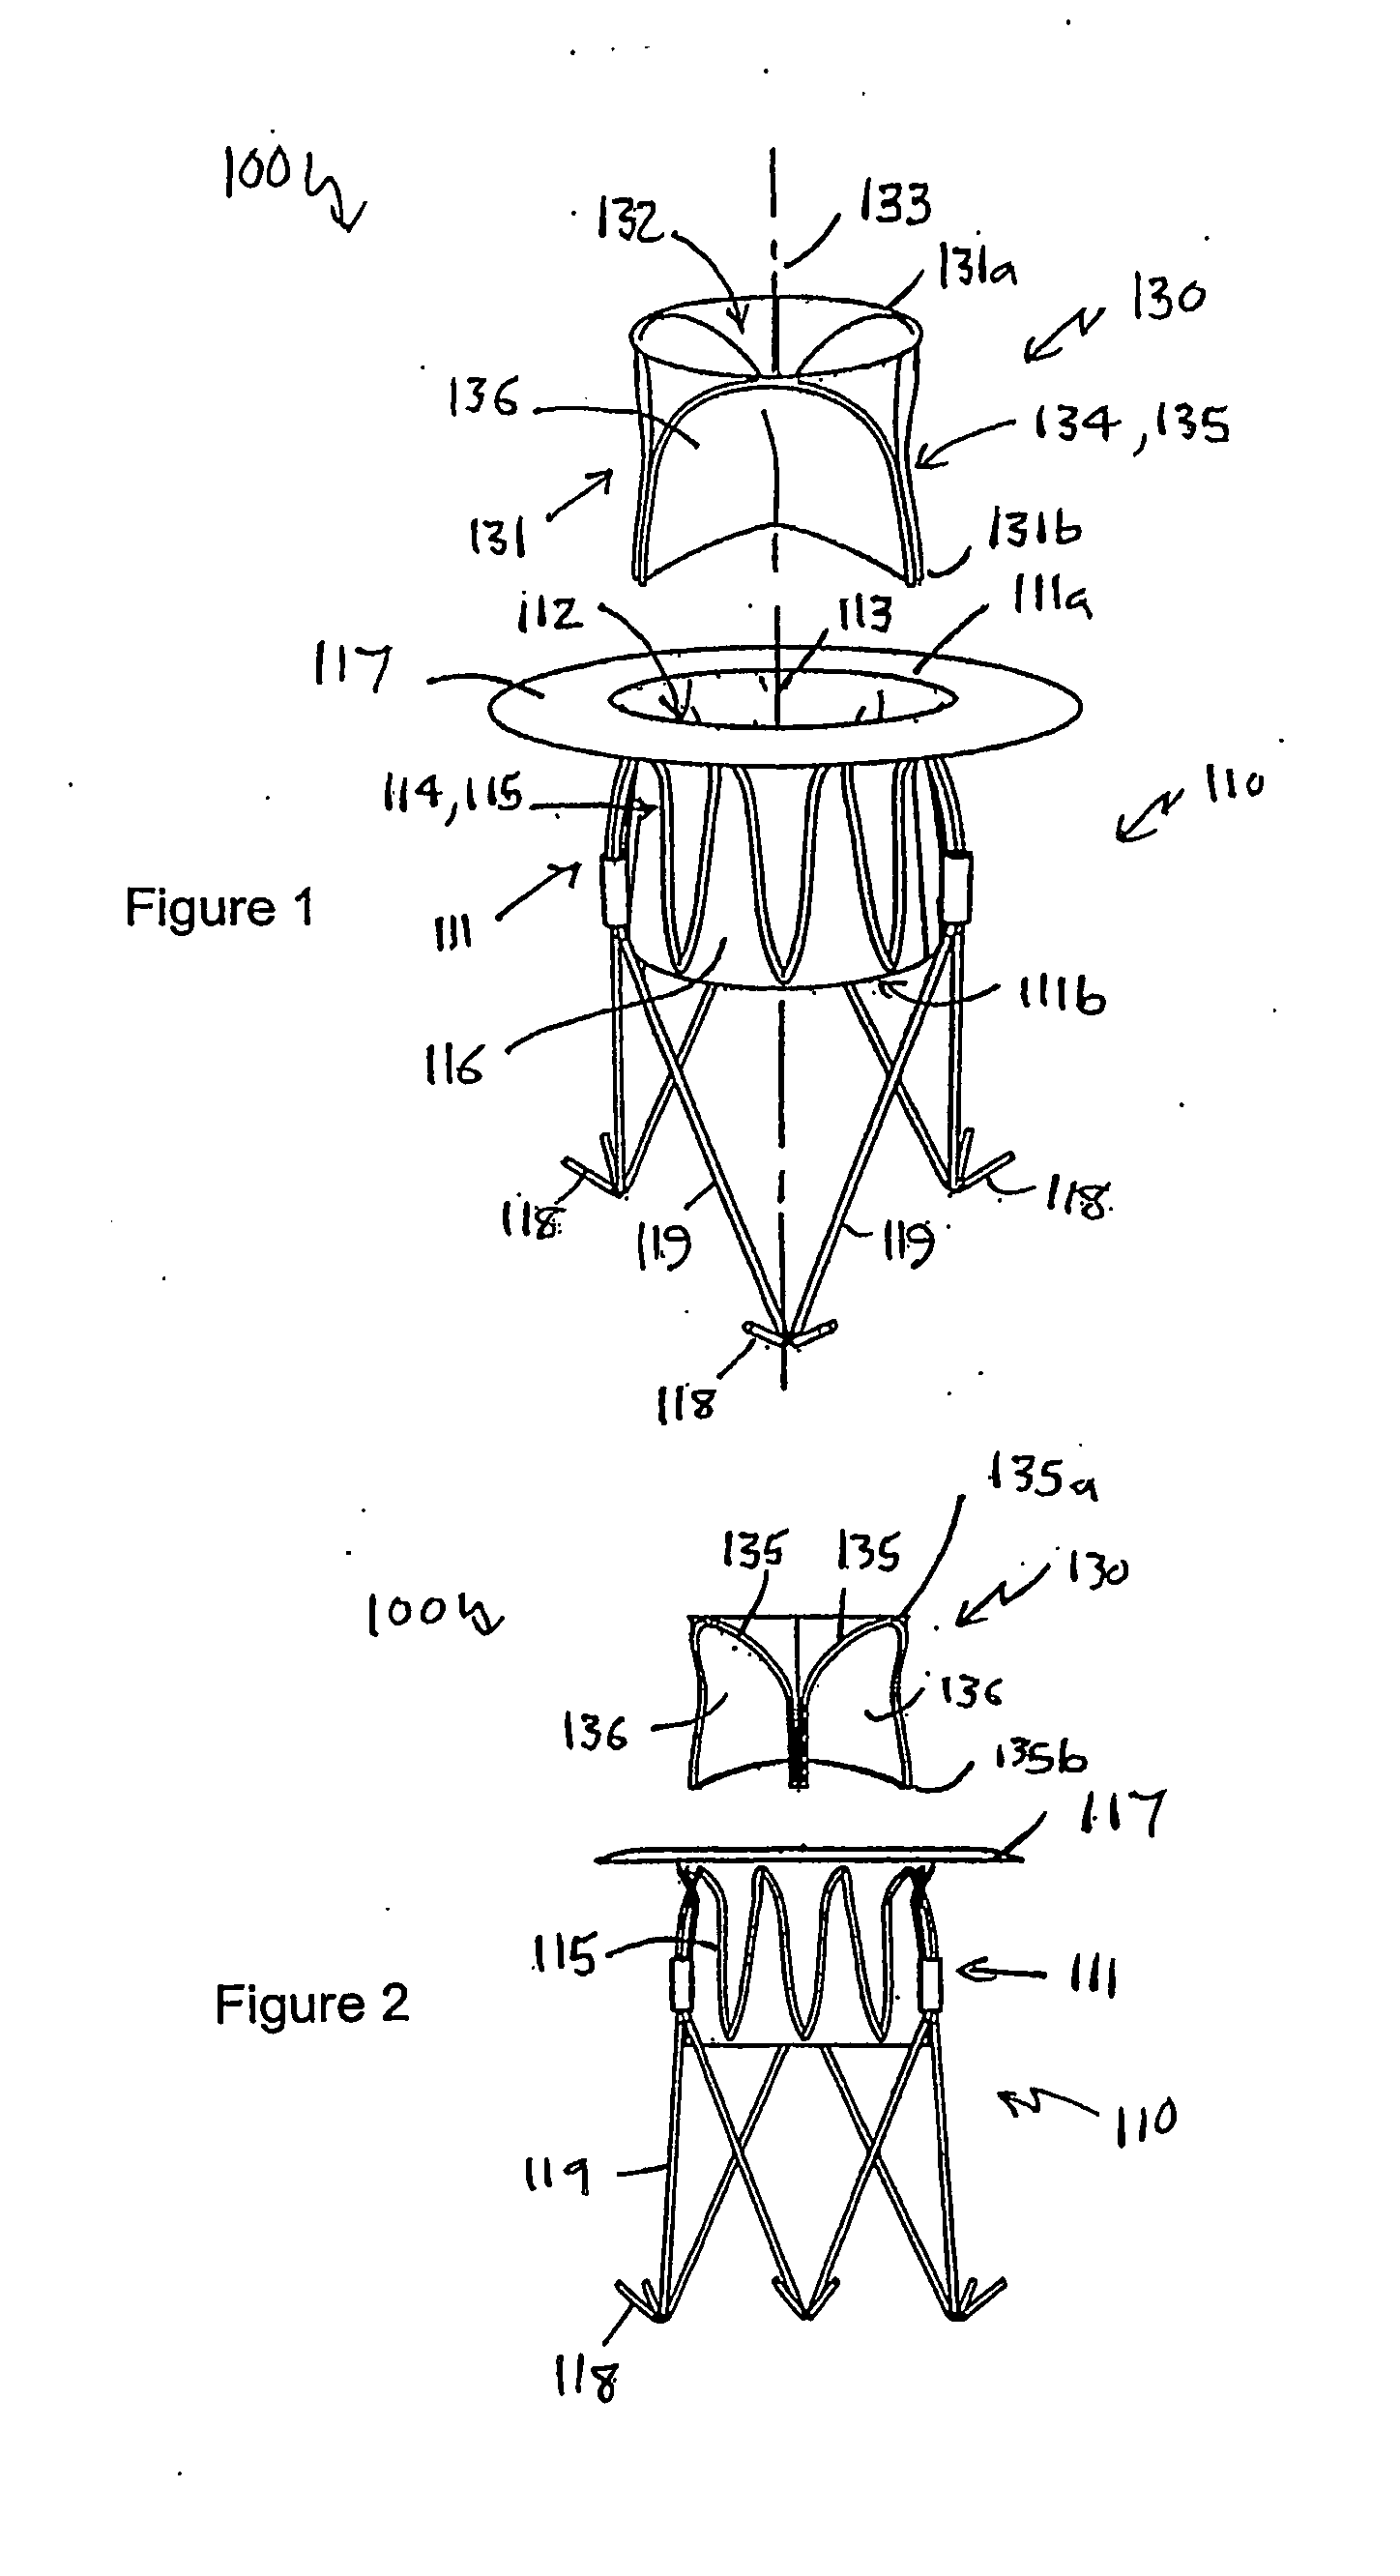 Heart valve prosthesis and method